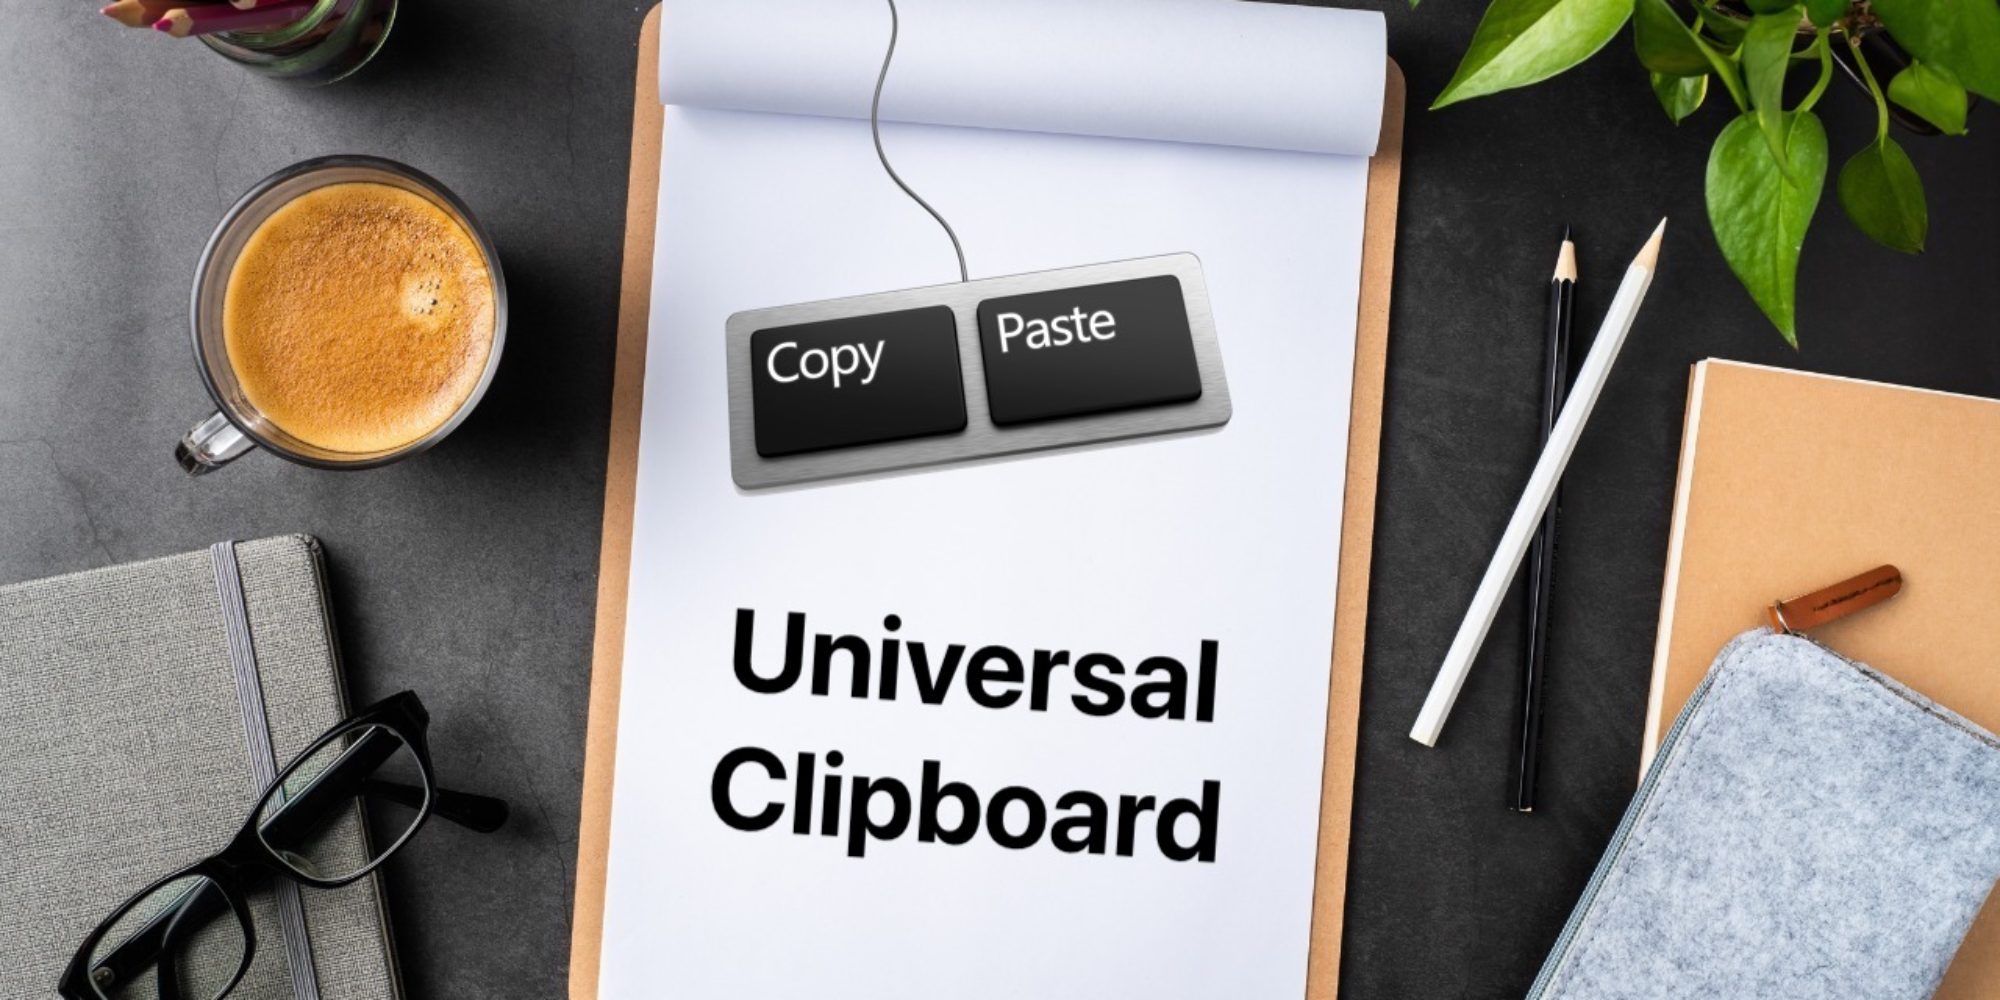 Copy and Paste between Your Apple Devices with Universal Clipboard